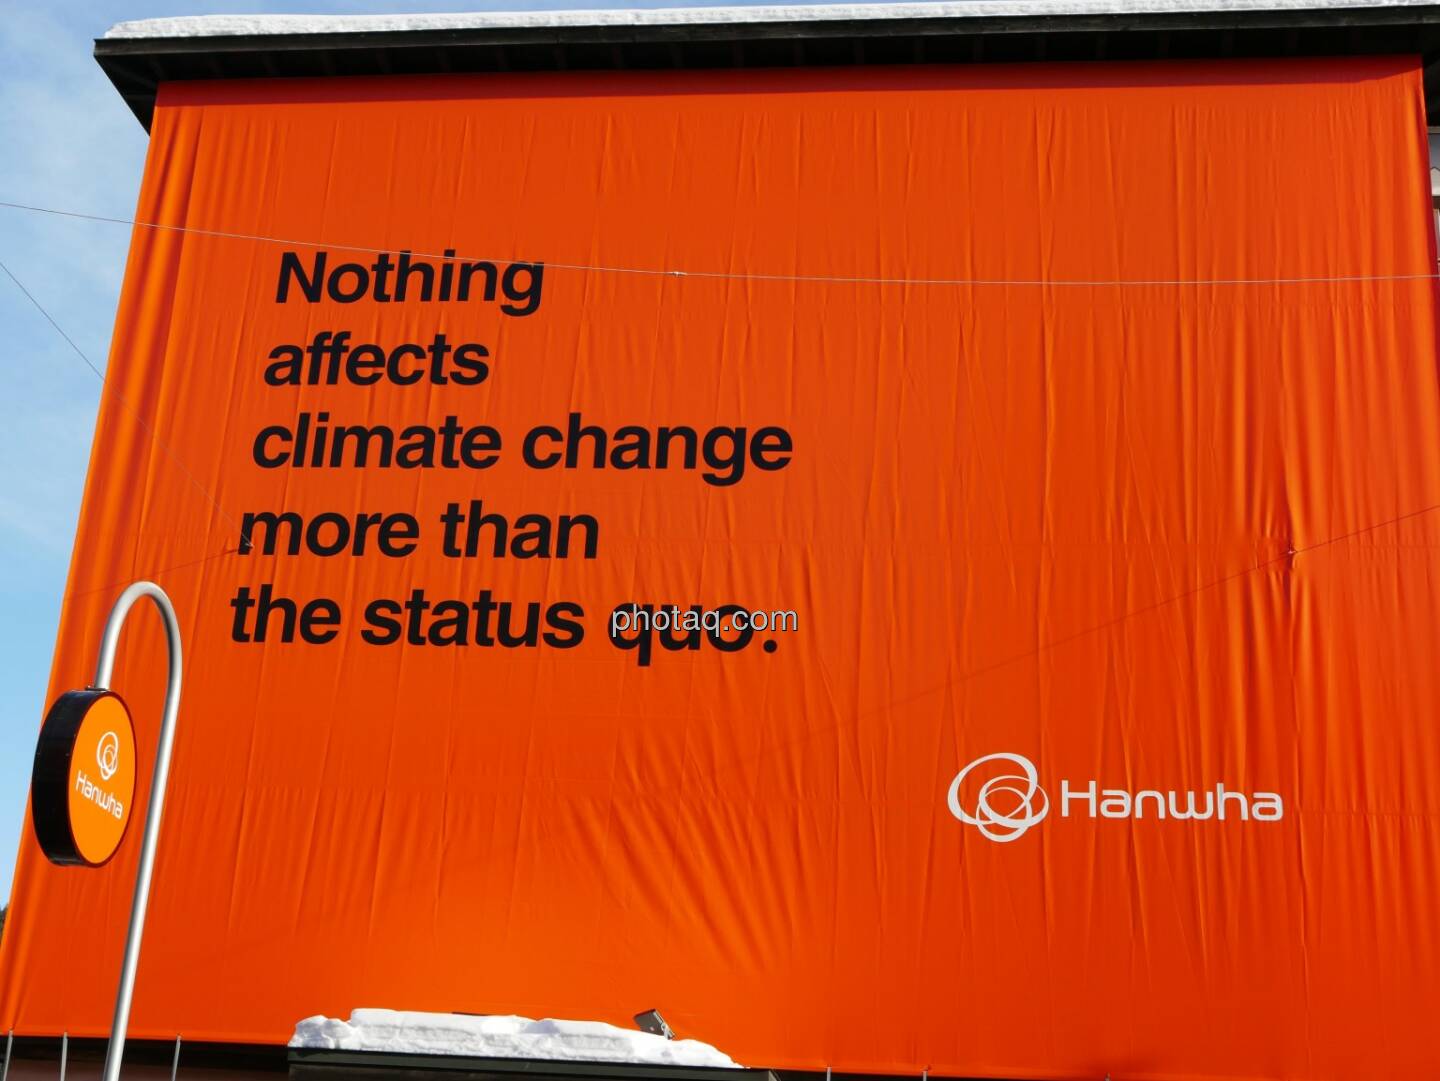 Hanwha, Nothing affects climate change more than the status quo